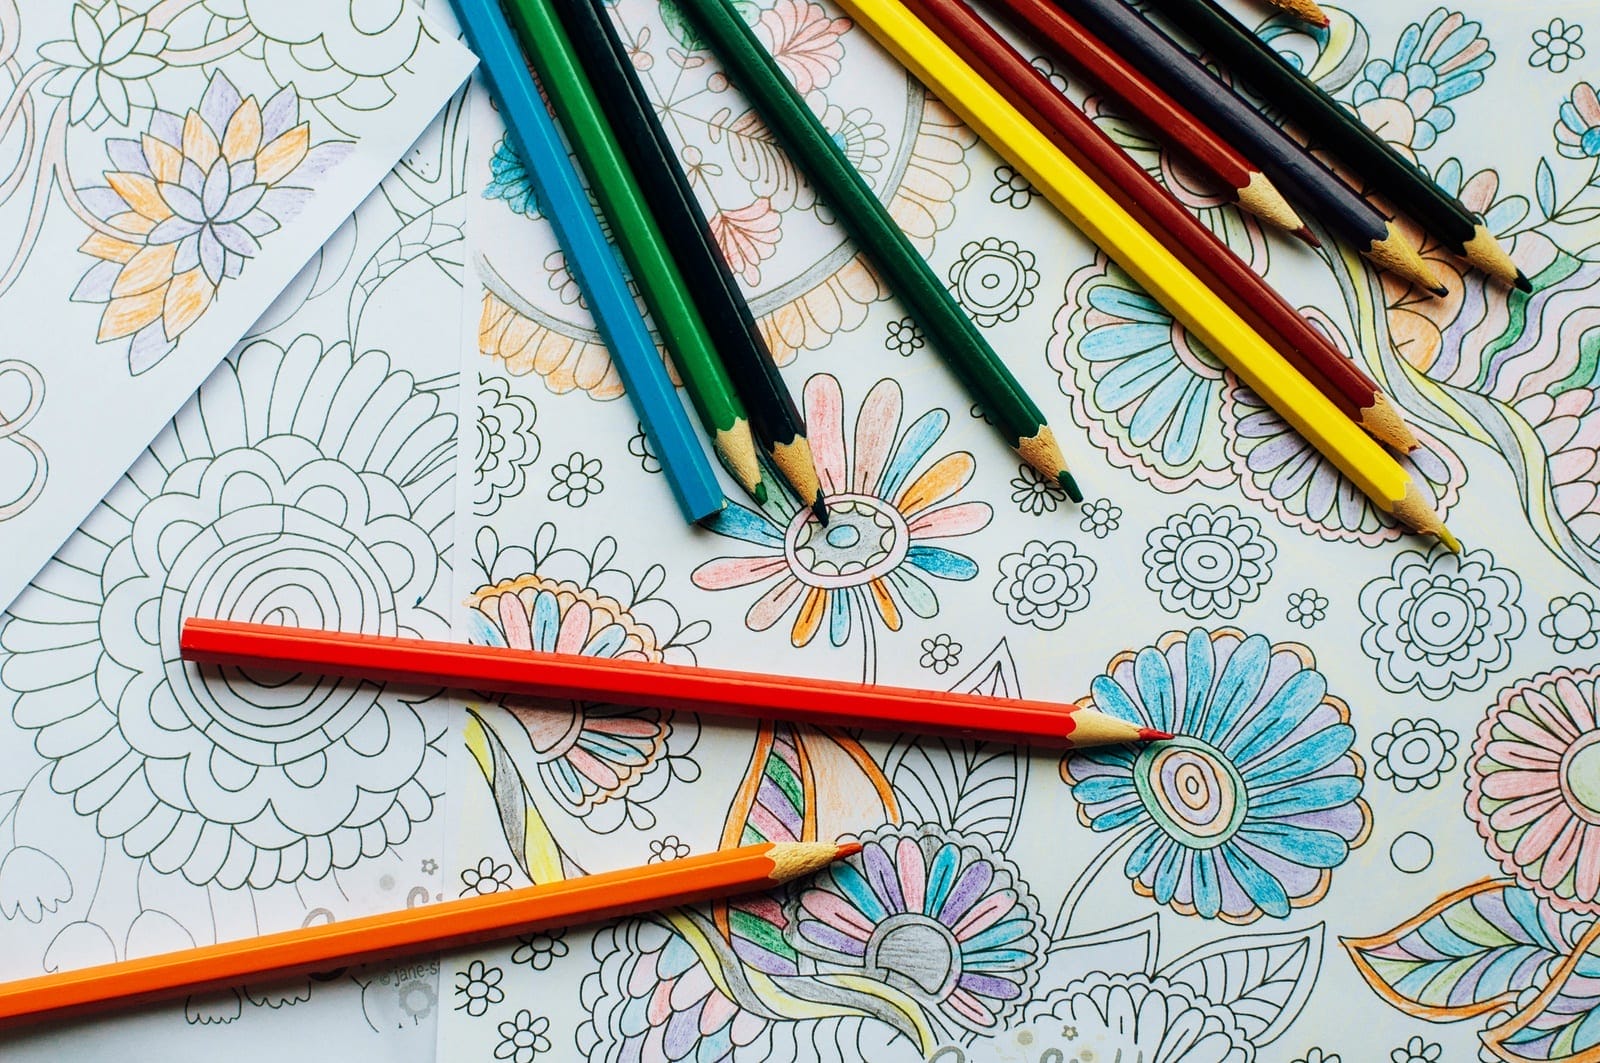 How to use colored pencils on adult coloring books. 